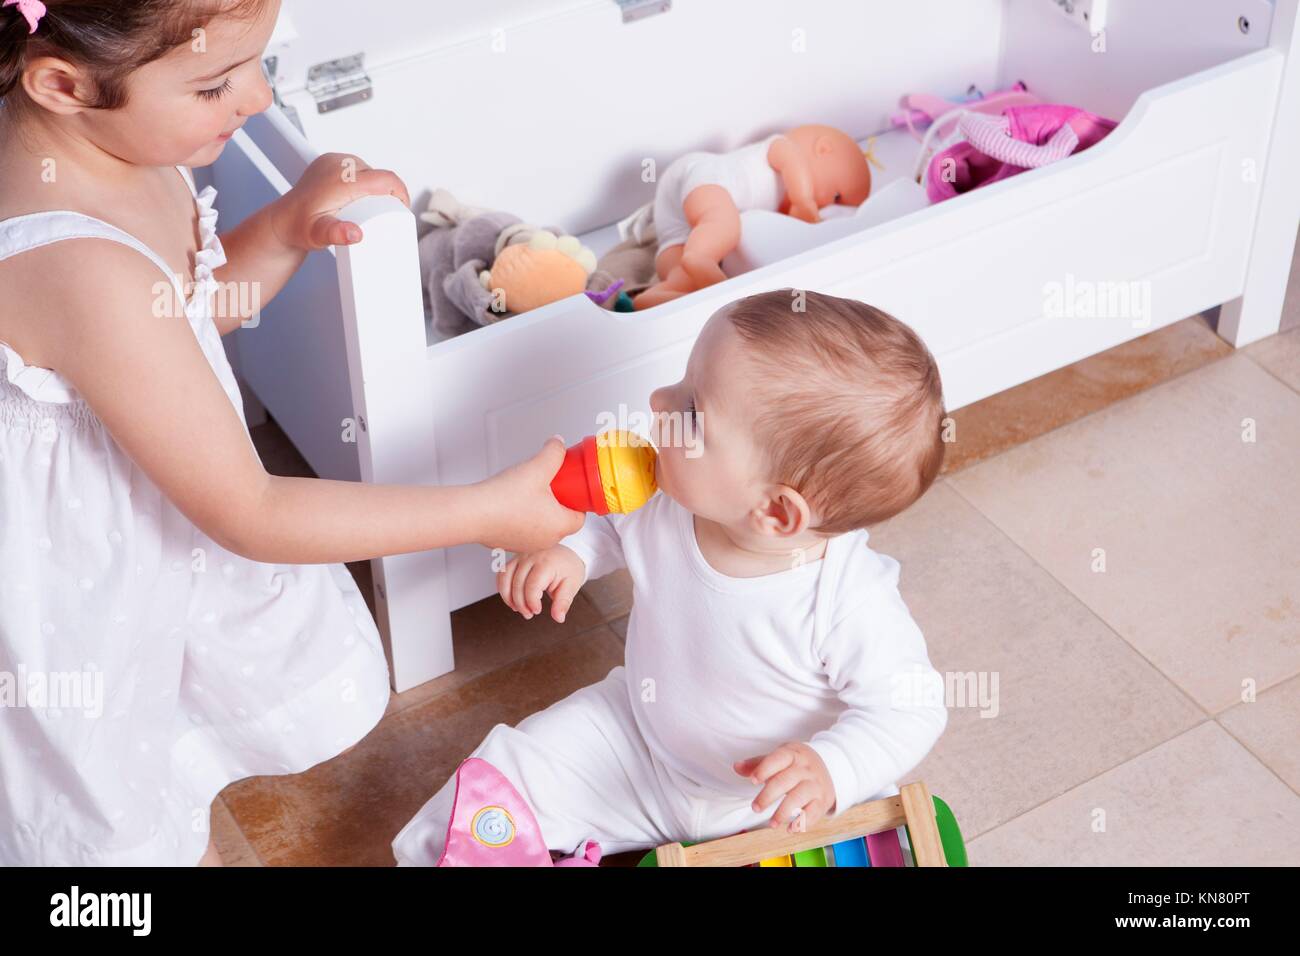 Baby boy playing with his sister at toys room. They are singing with a toy microphone. Stock Photo